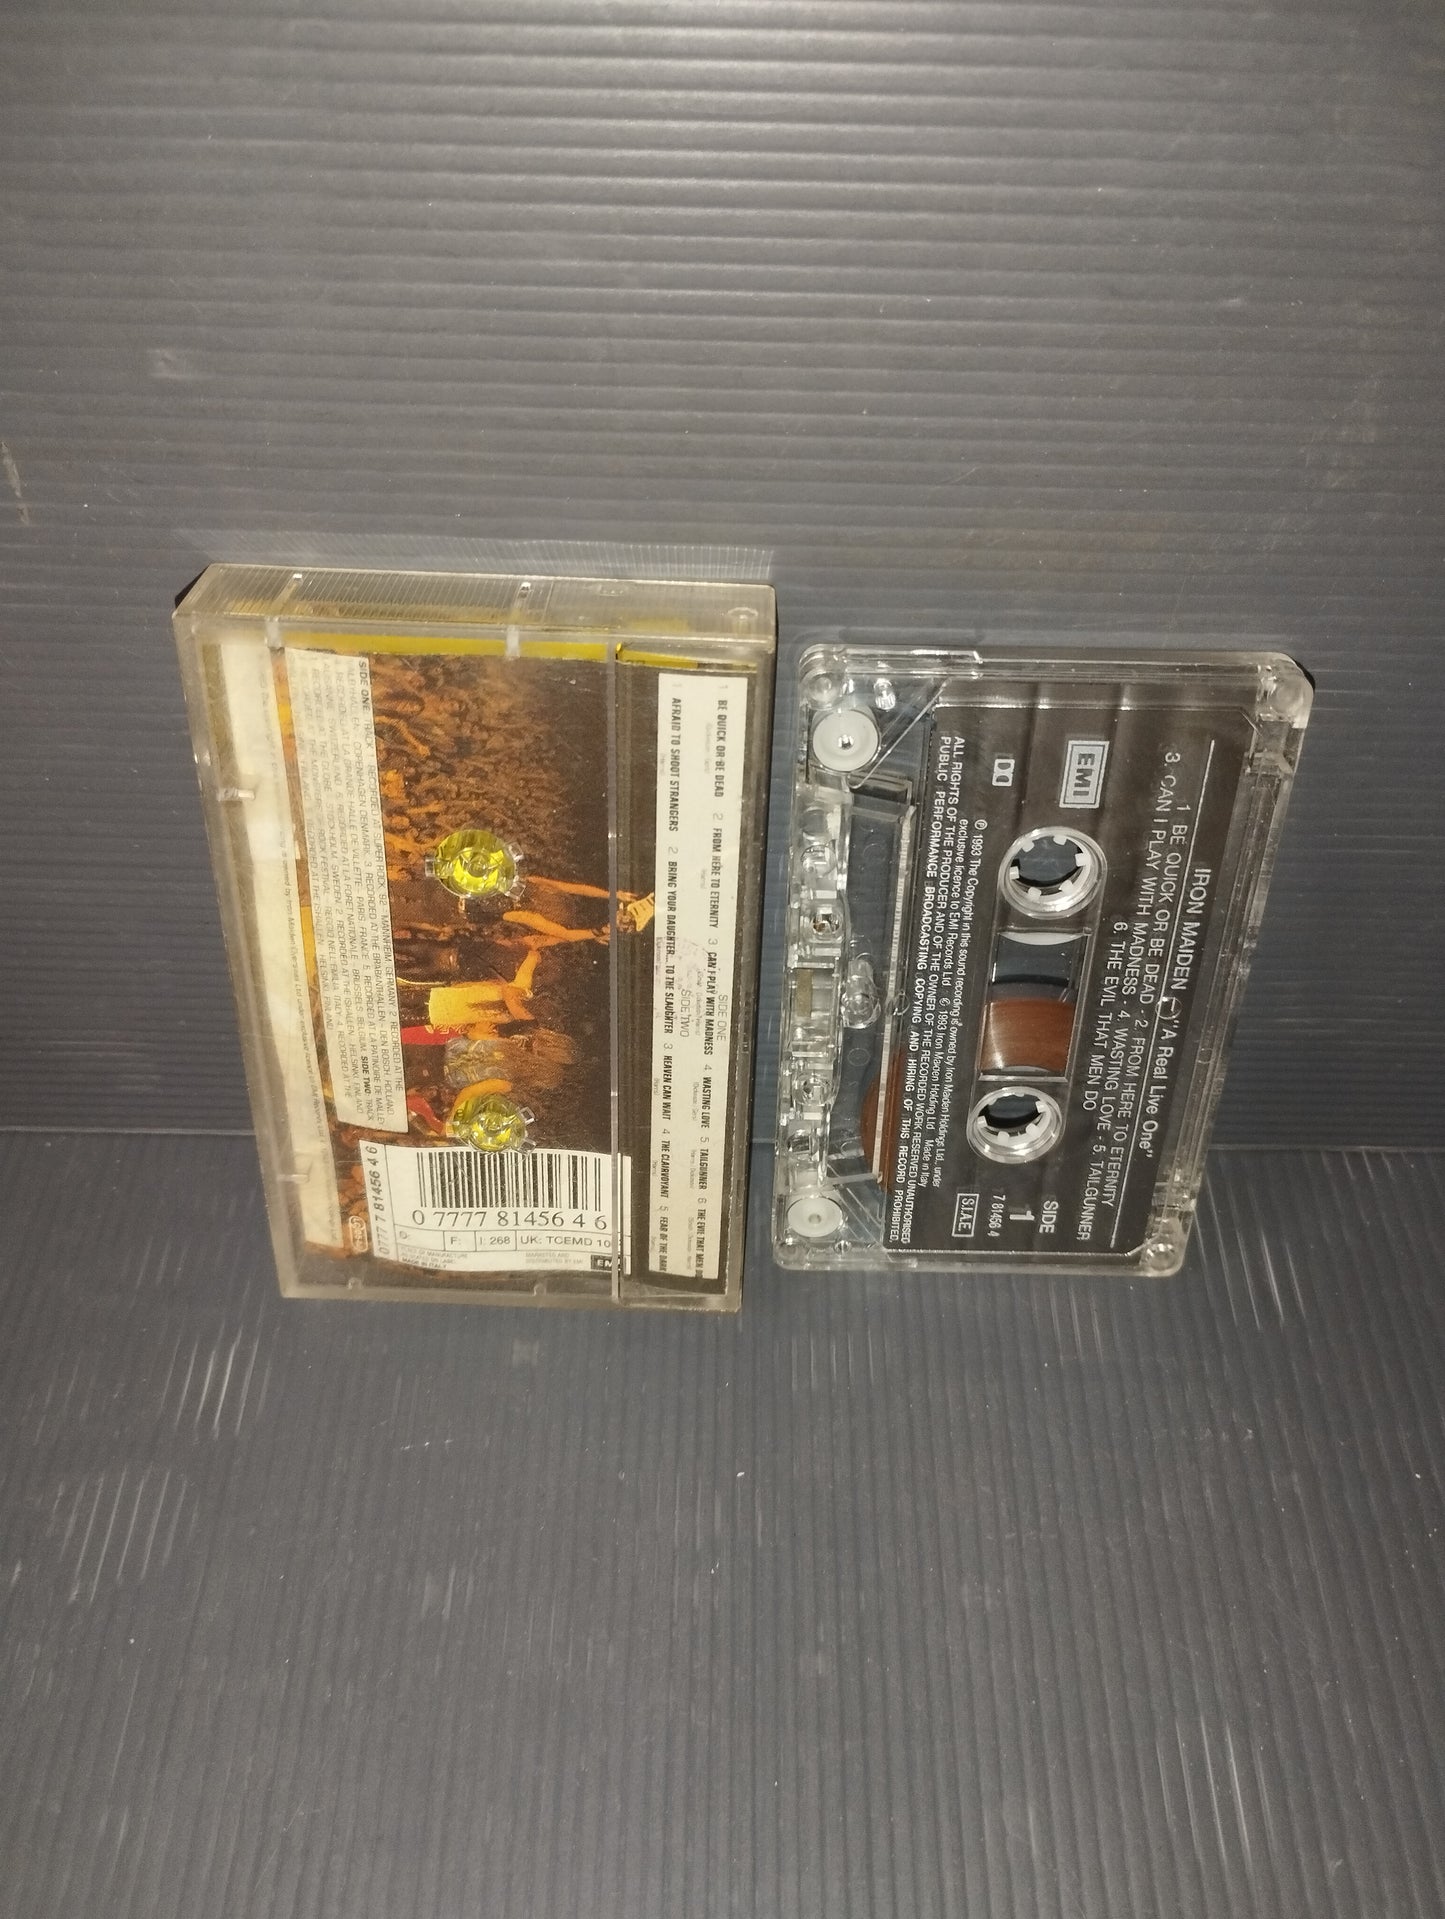 A Real Live One Iron Maiden cassette